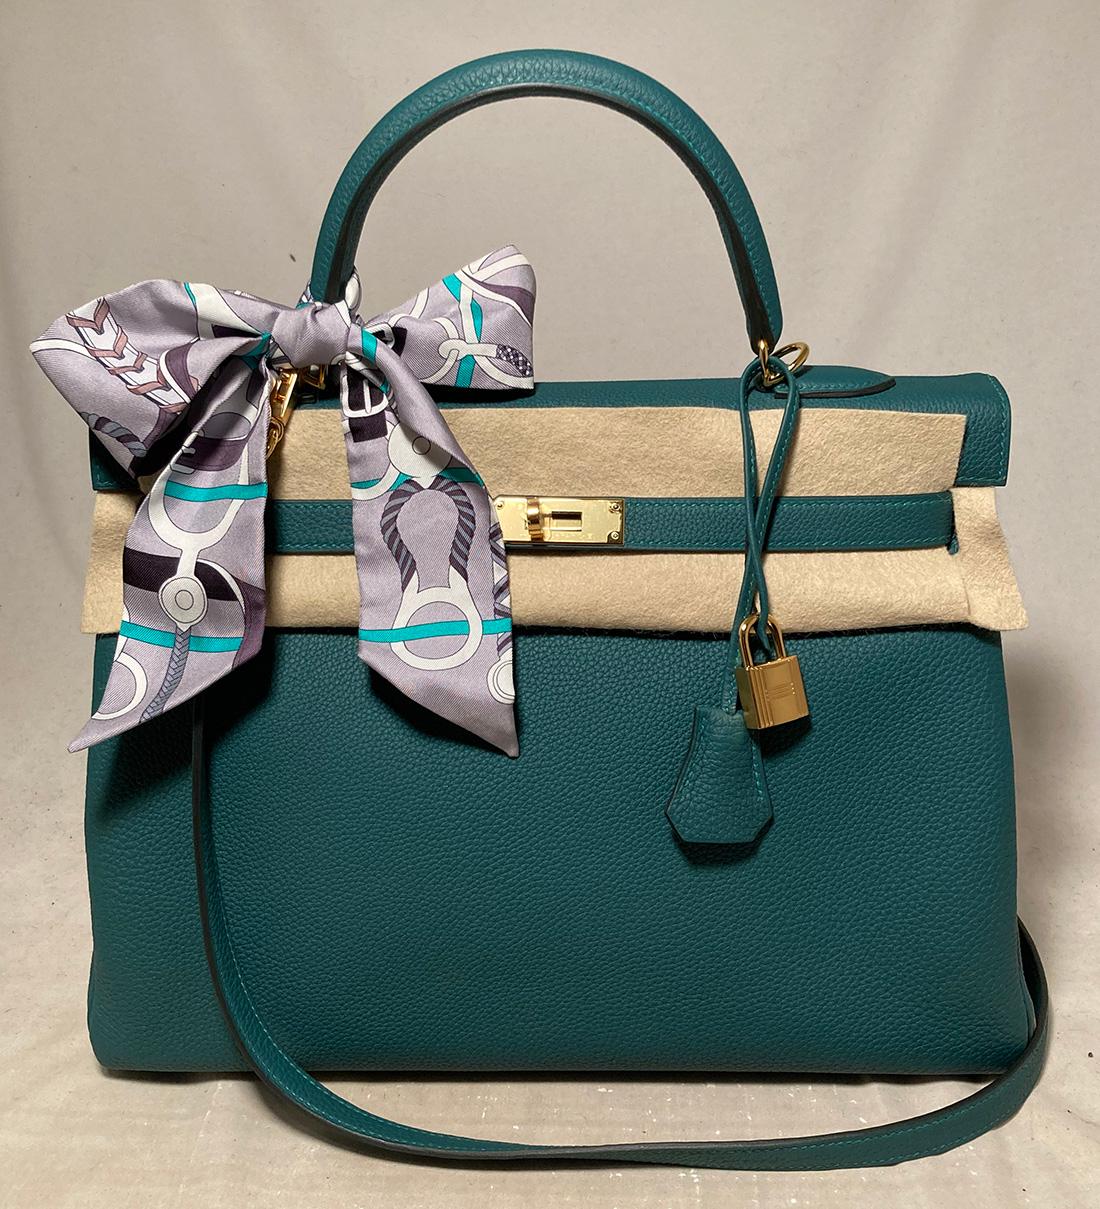 NWOT Hermes Malachite Green Togo Kelly 35 GHW in New Unused condition. Gorgeous rare malachite green togo leather trimmed with gold hardware. Clochette with keys and lock, shoulder strap, box, dust cover, raincoat and care booklet and twilly